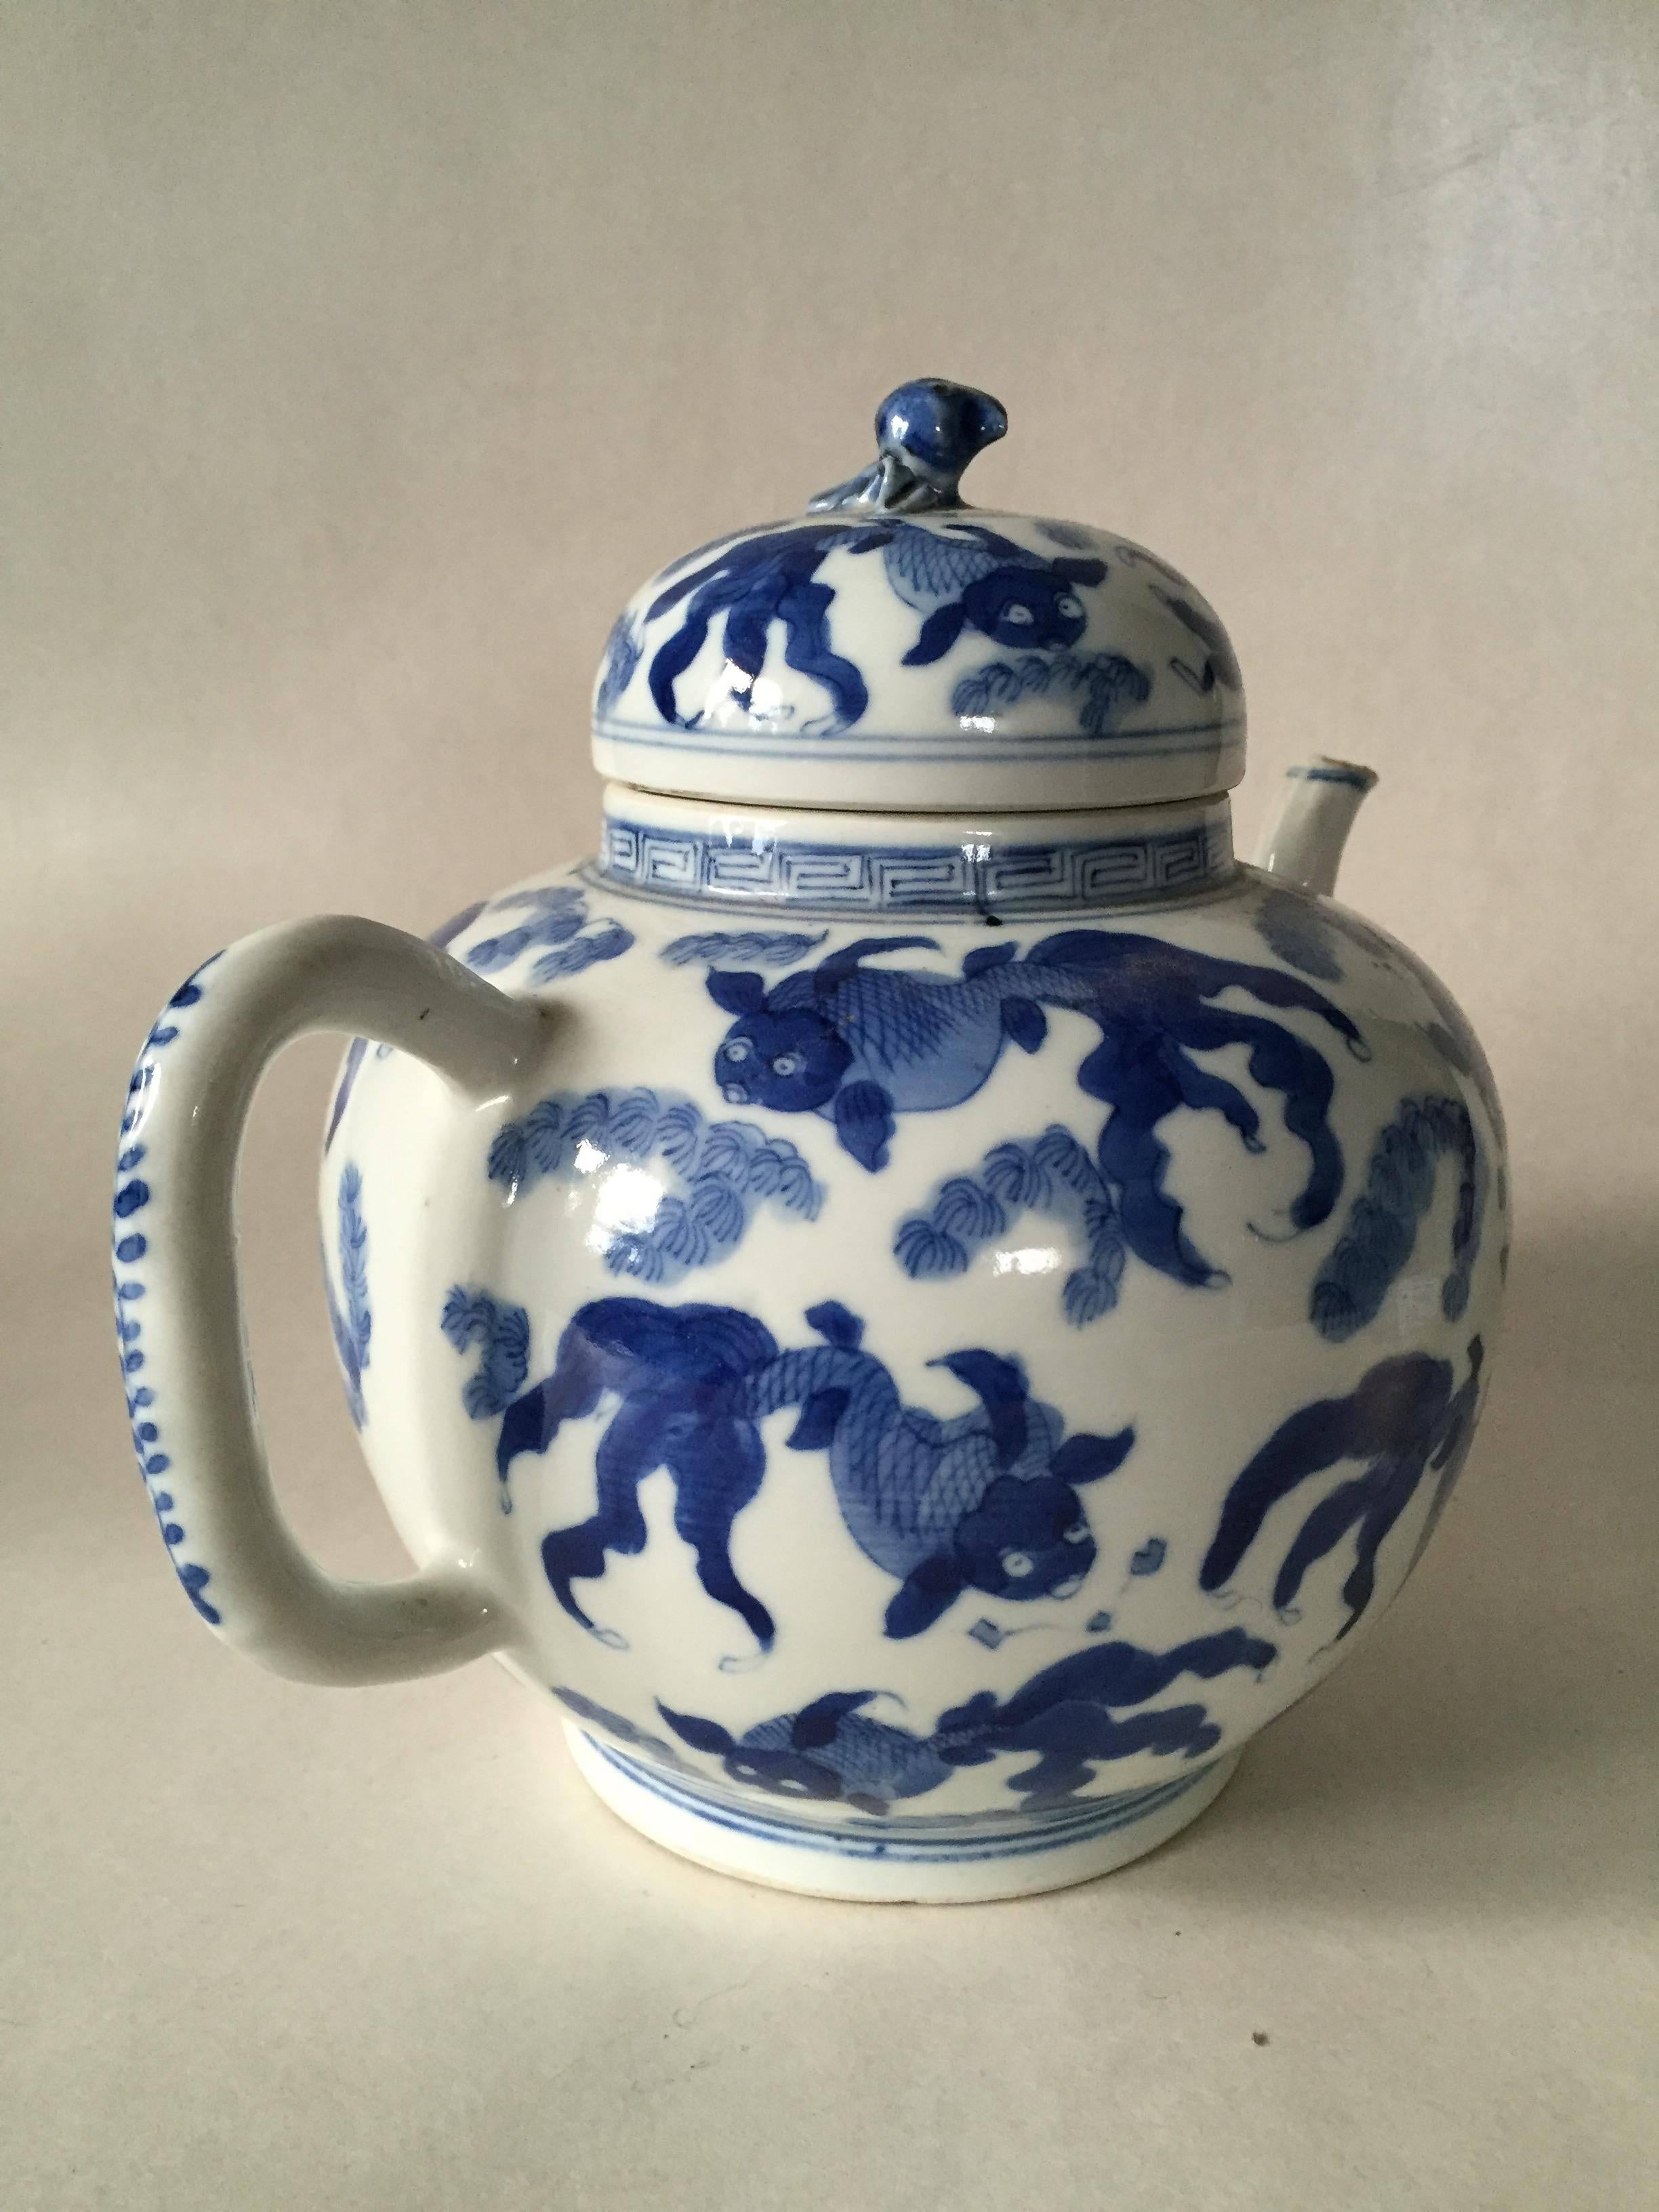 A fantastic and rare blue and white teapot made during the first part of the 18th century, most likely during the late Kangxi reign or early Yongzheng. The teapot is in a very nice condition, there are only some minor frits on the mouth of the pipe,